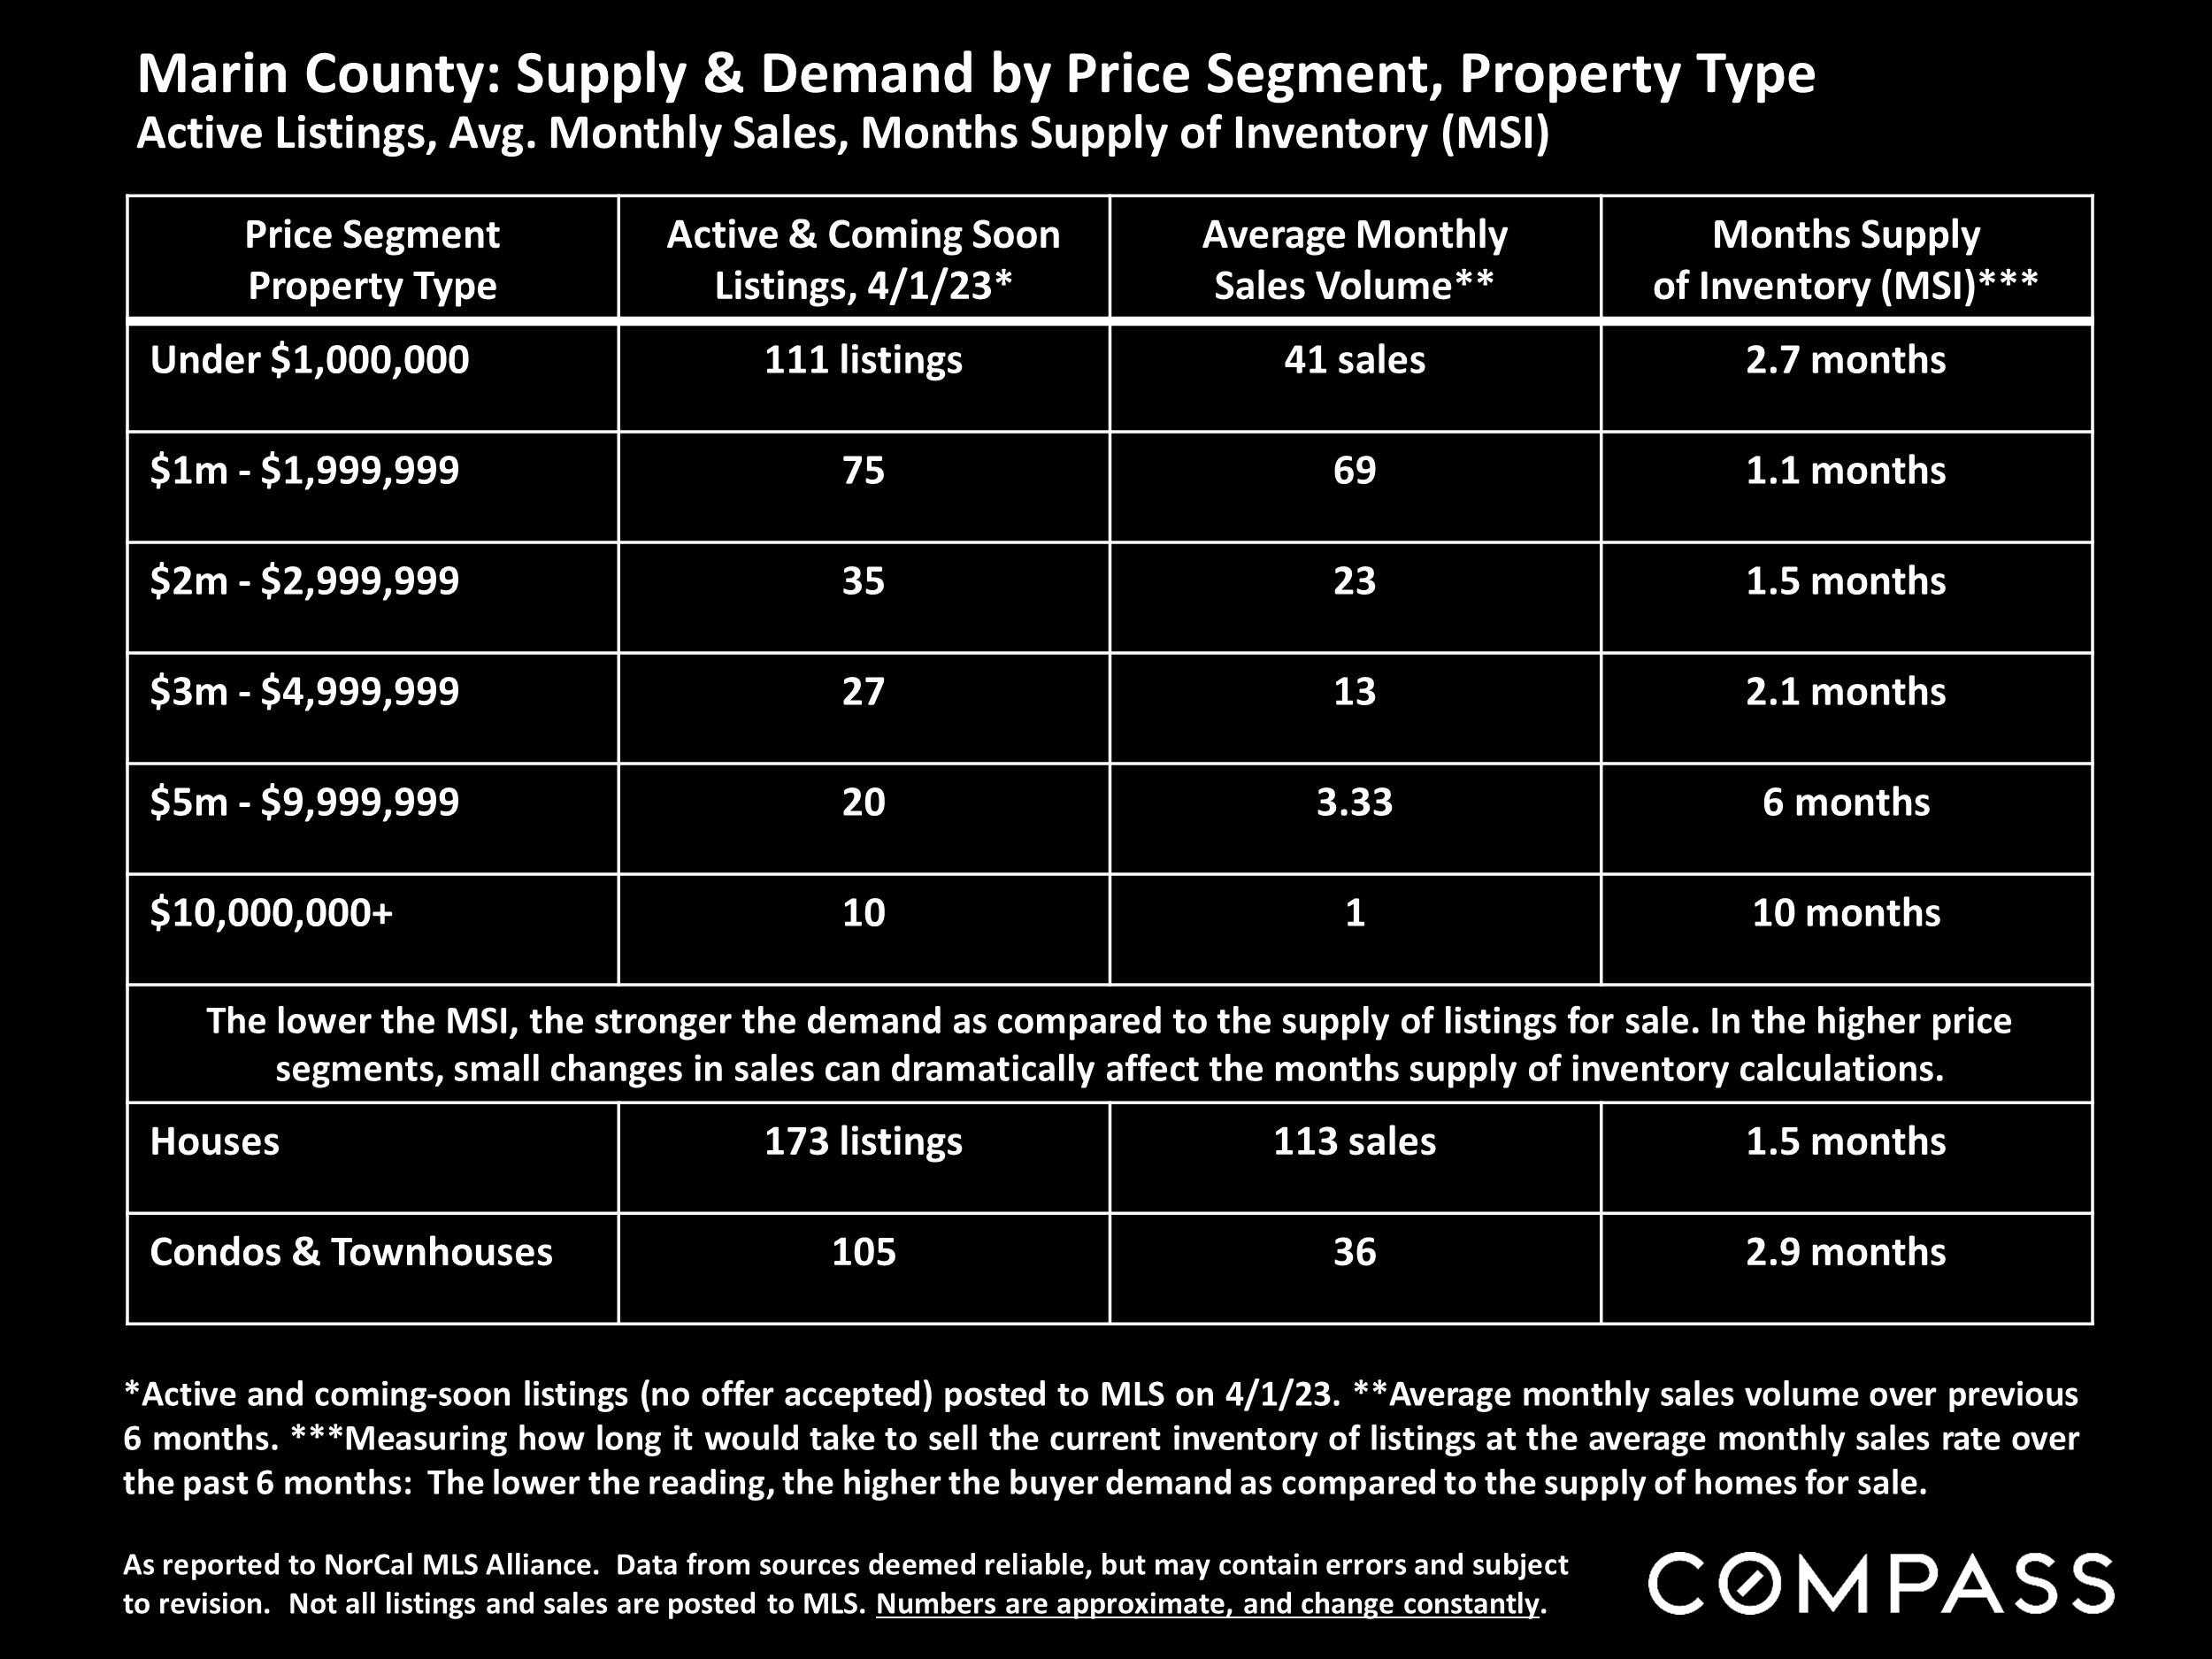 Marin County: Supply & Demand by Price Segment, Property Type